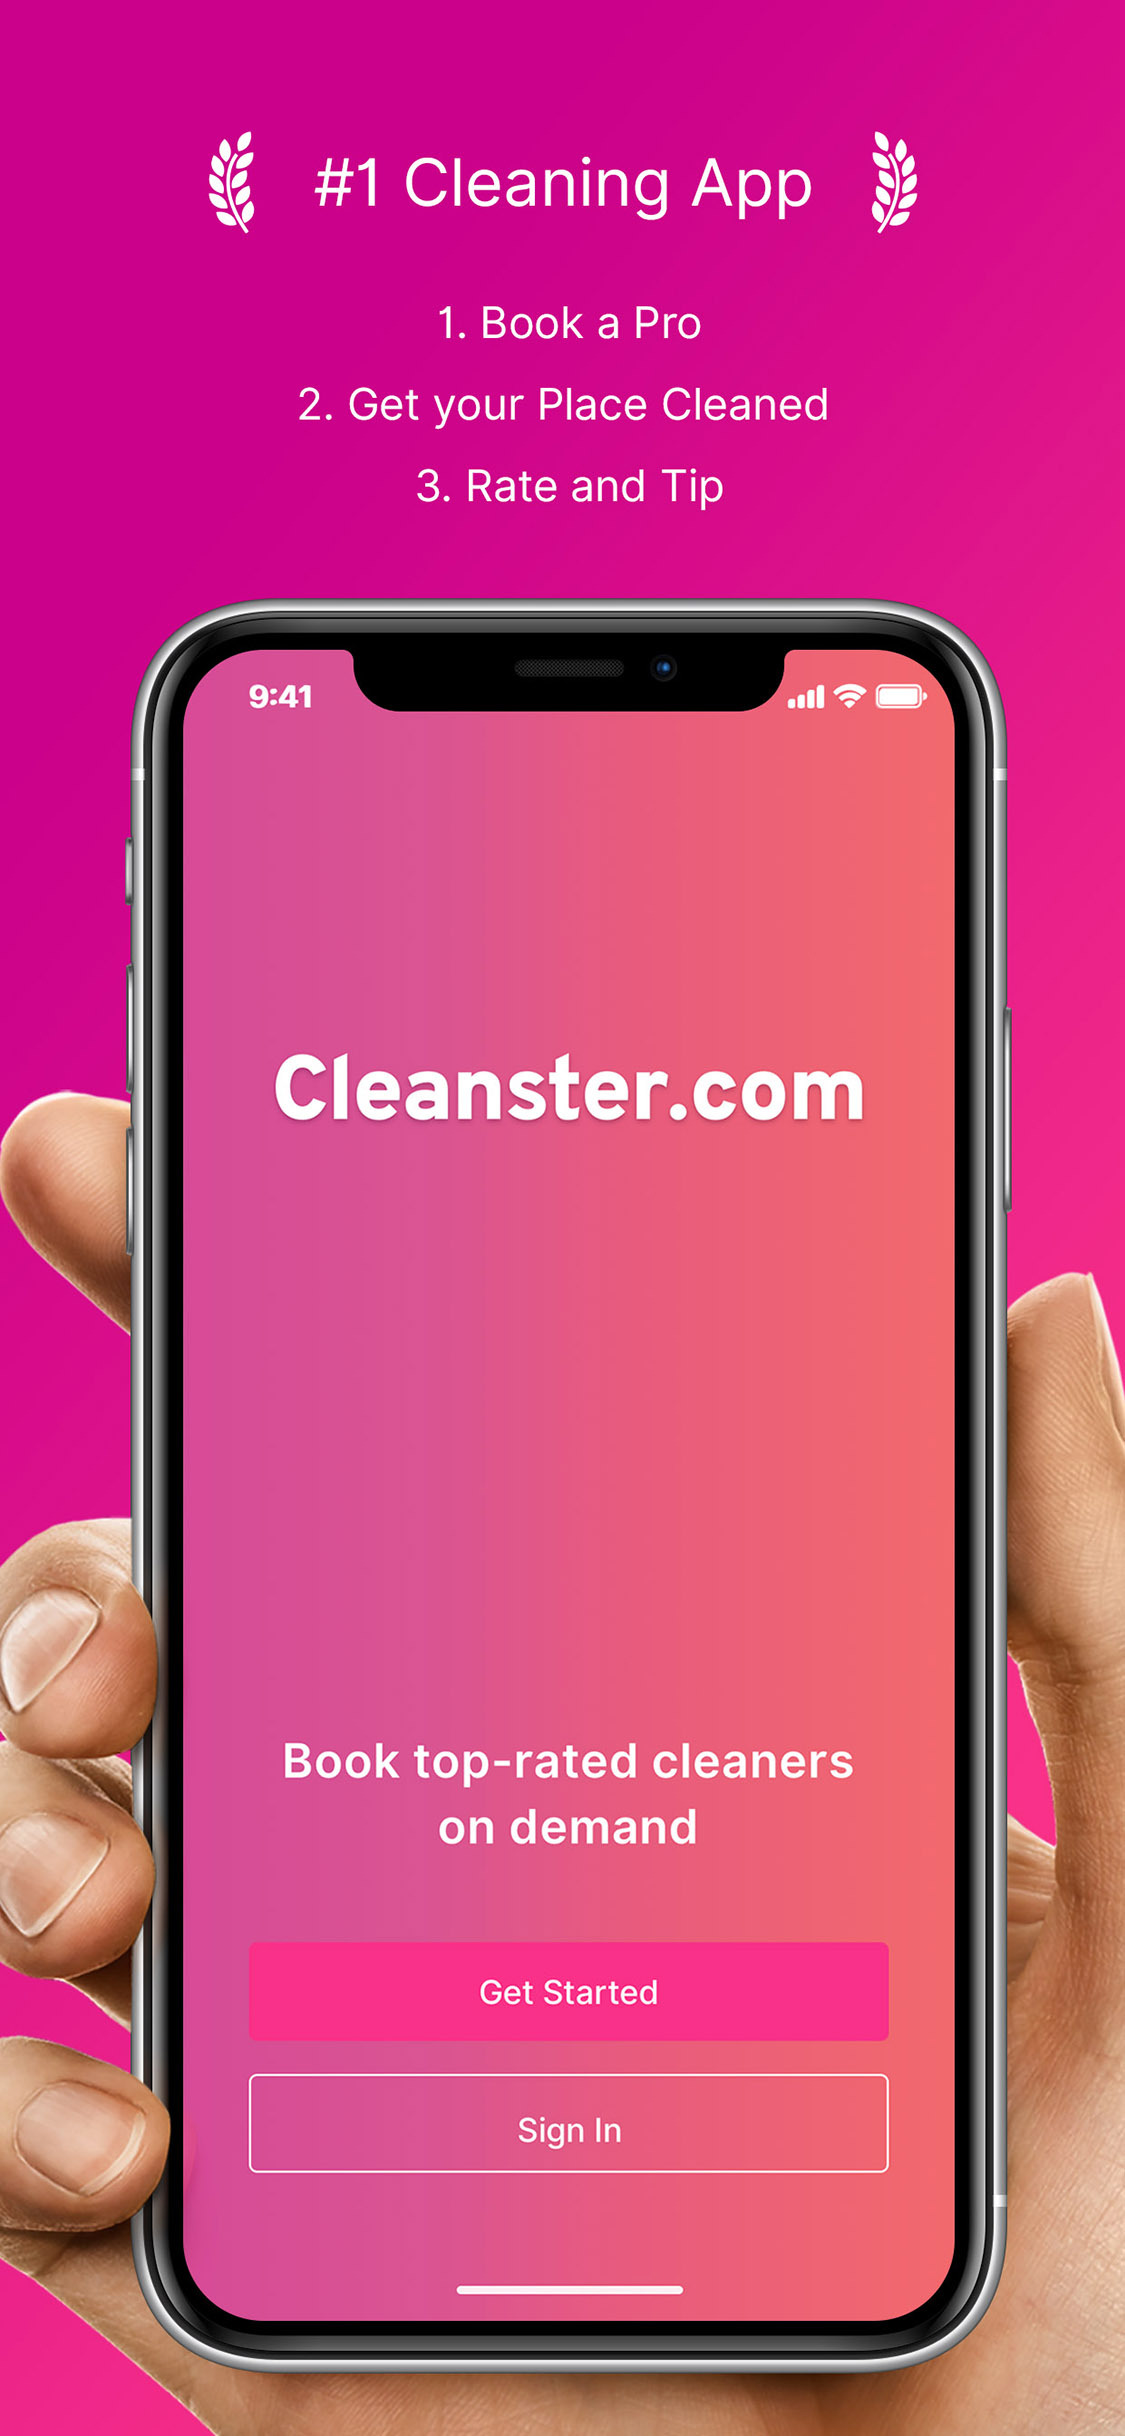 Check Up On The Cleaners Through Cleanster.com